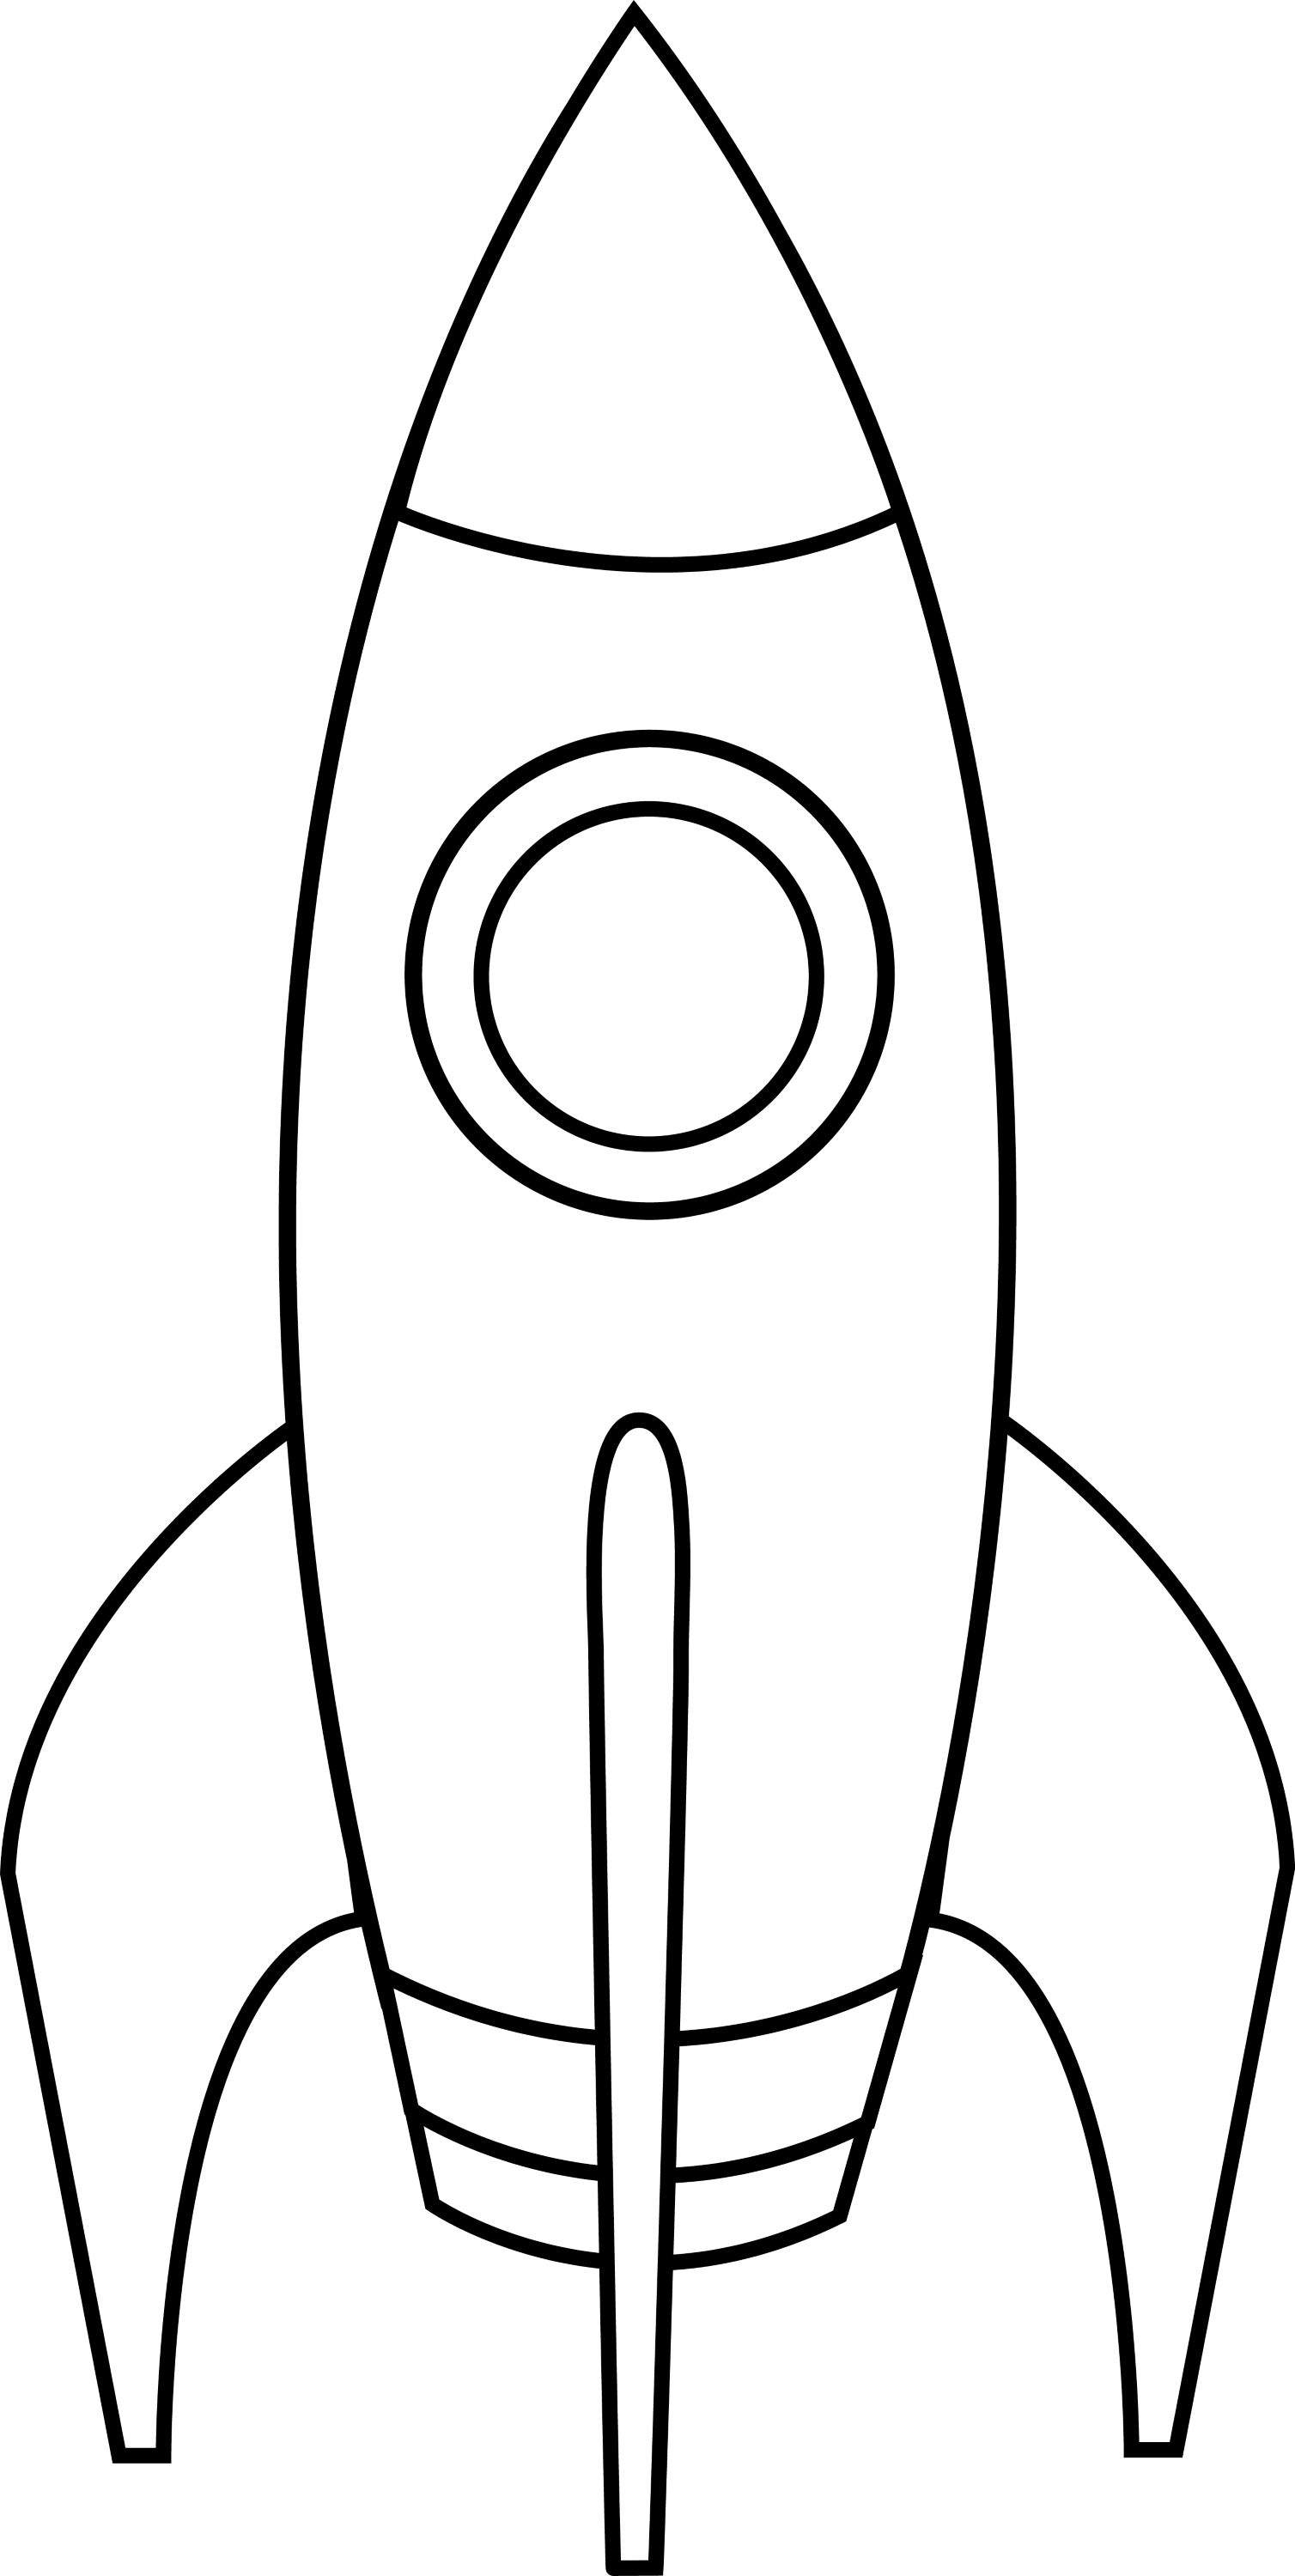 rocket ship clipart black and white - photo #8